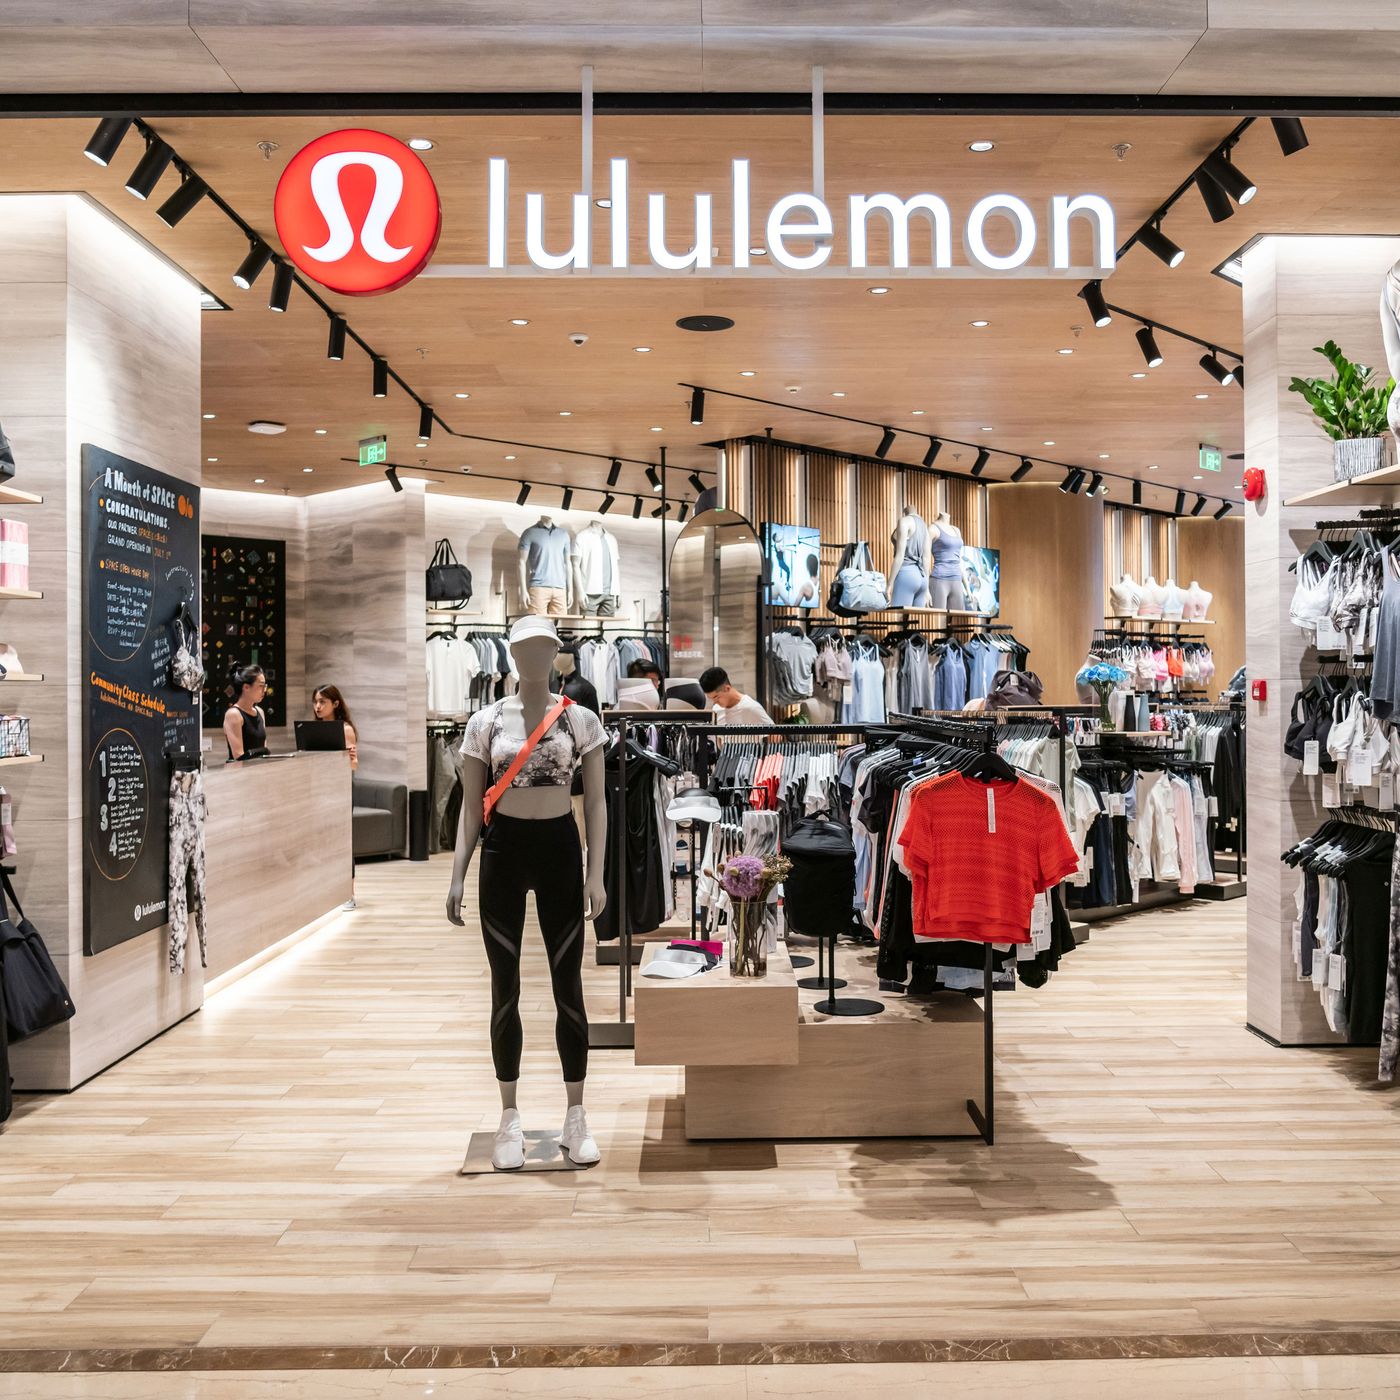 Lululemon sells 'self-care products' because every brand wants to